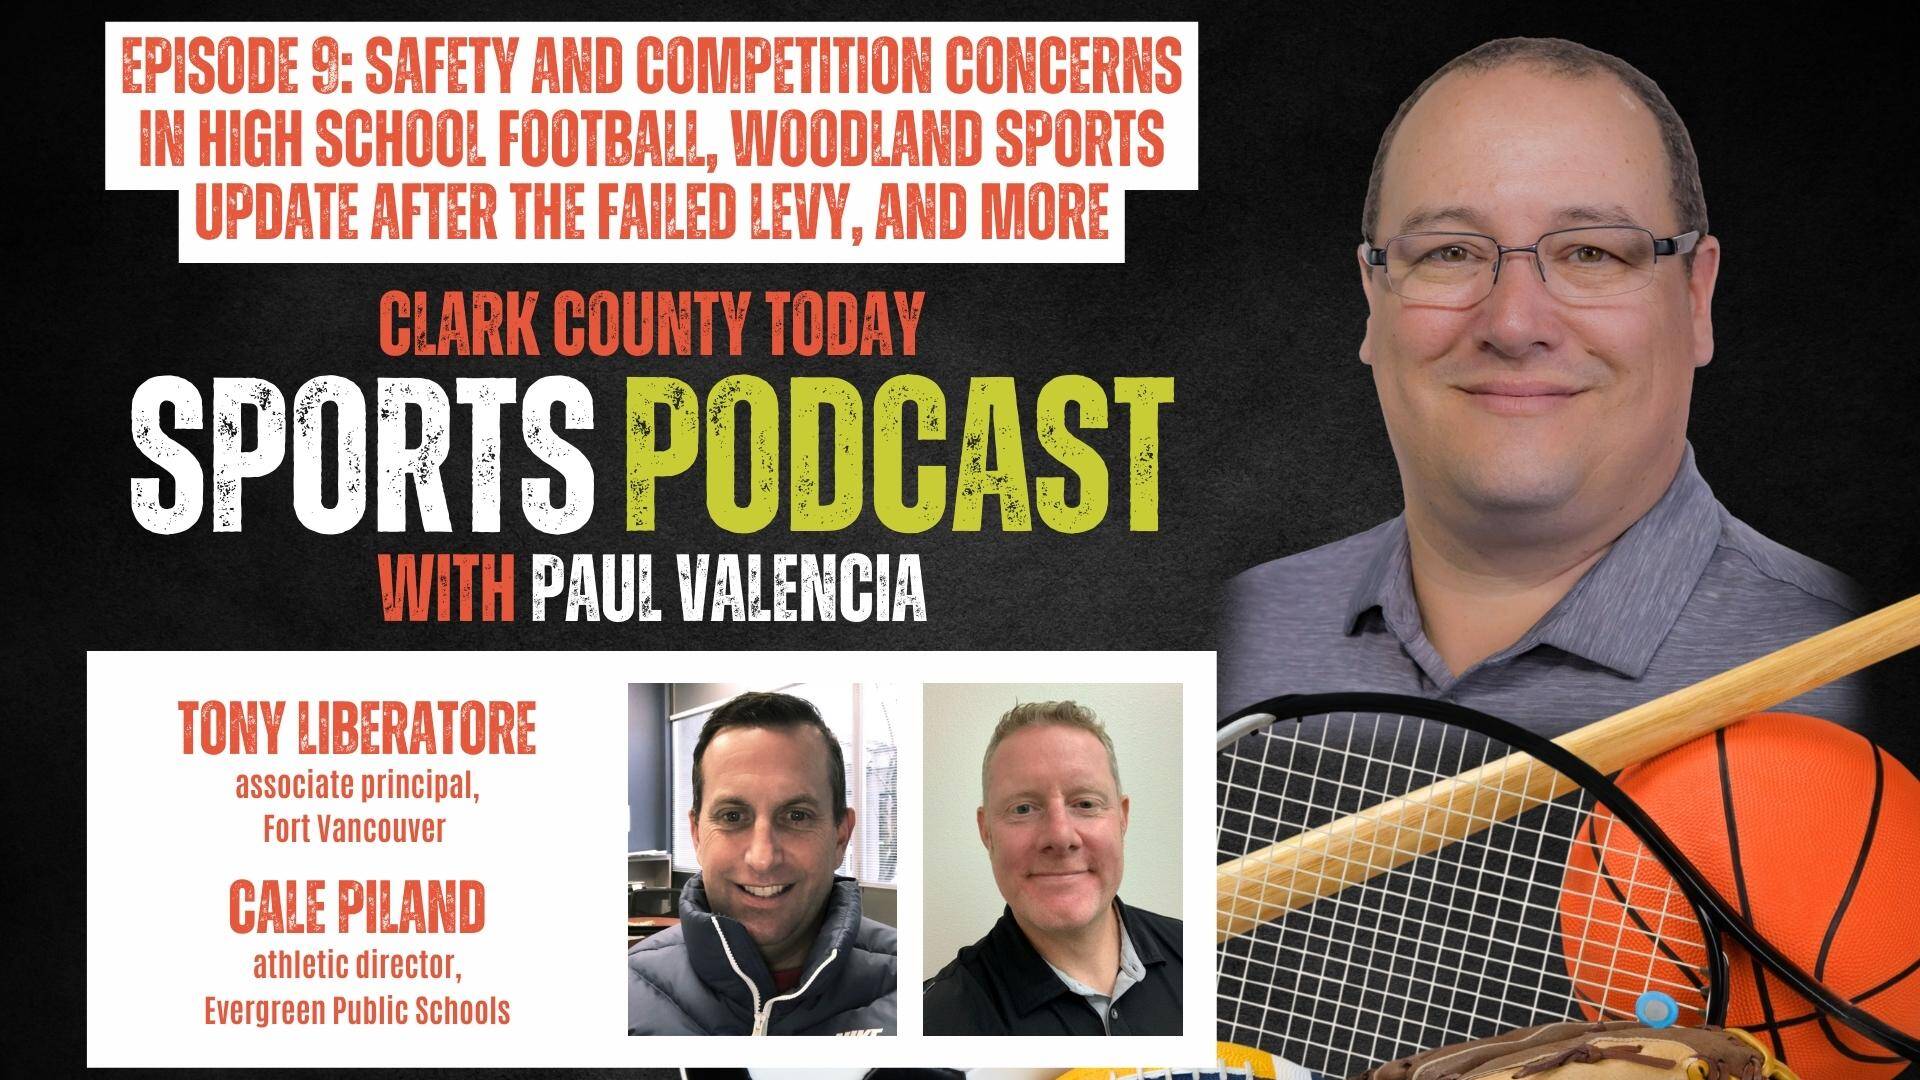 The sports enthusiasts talk about competition between the haves and the have-nots in high school football, WIAA reclassification update, Woodland High School’s sports issues after the fail of a levy, and more